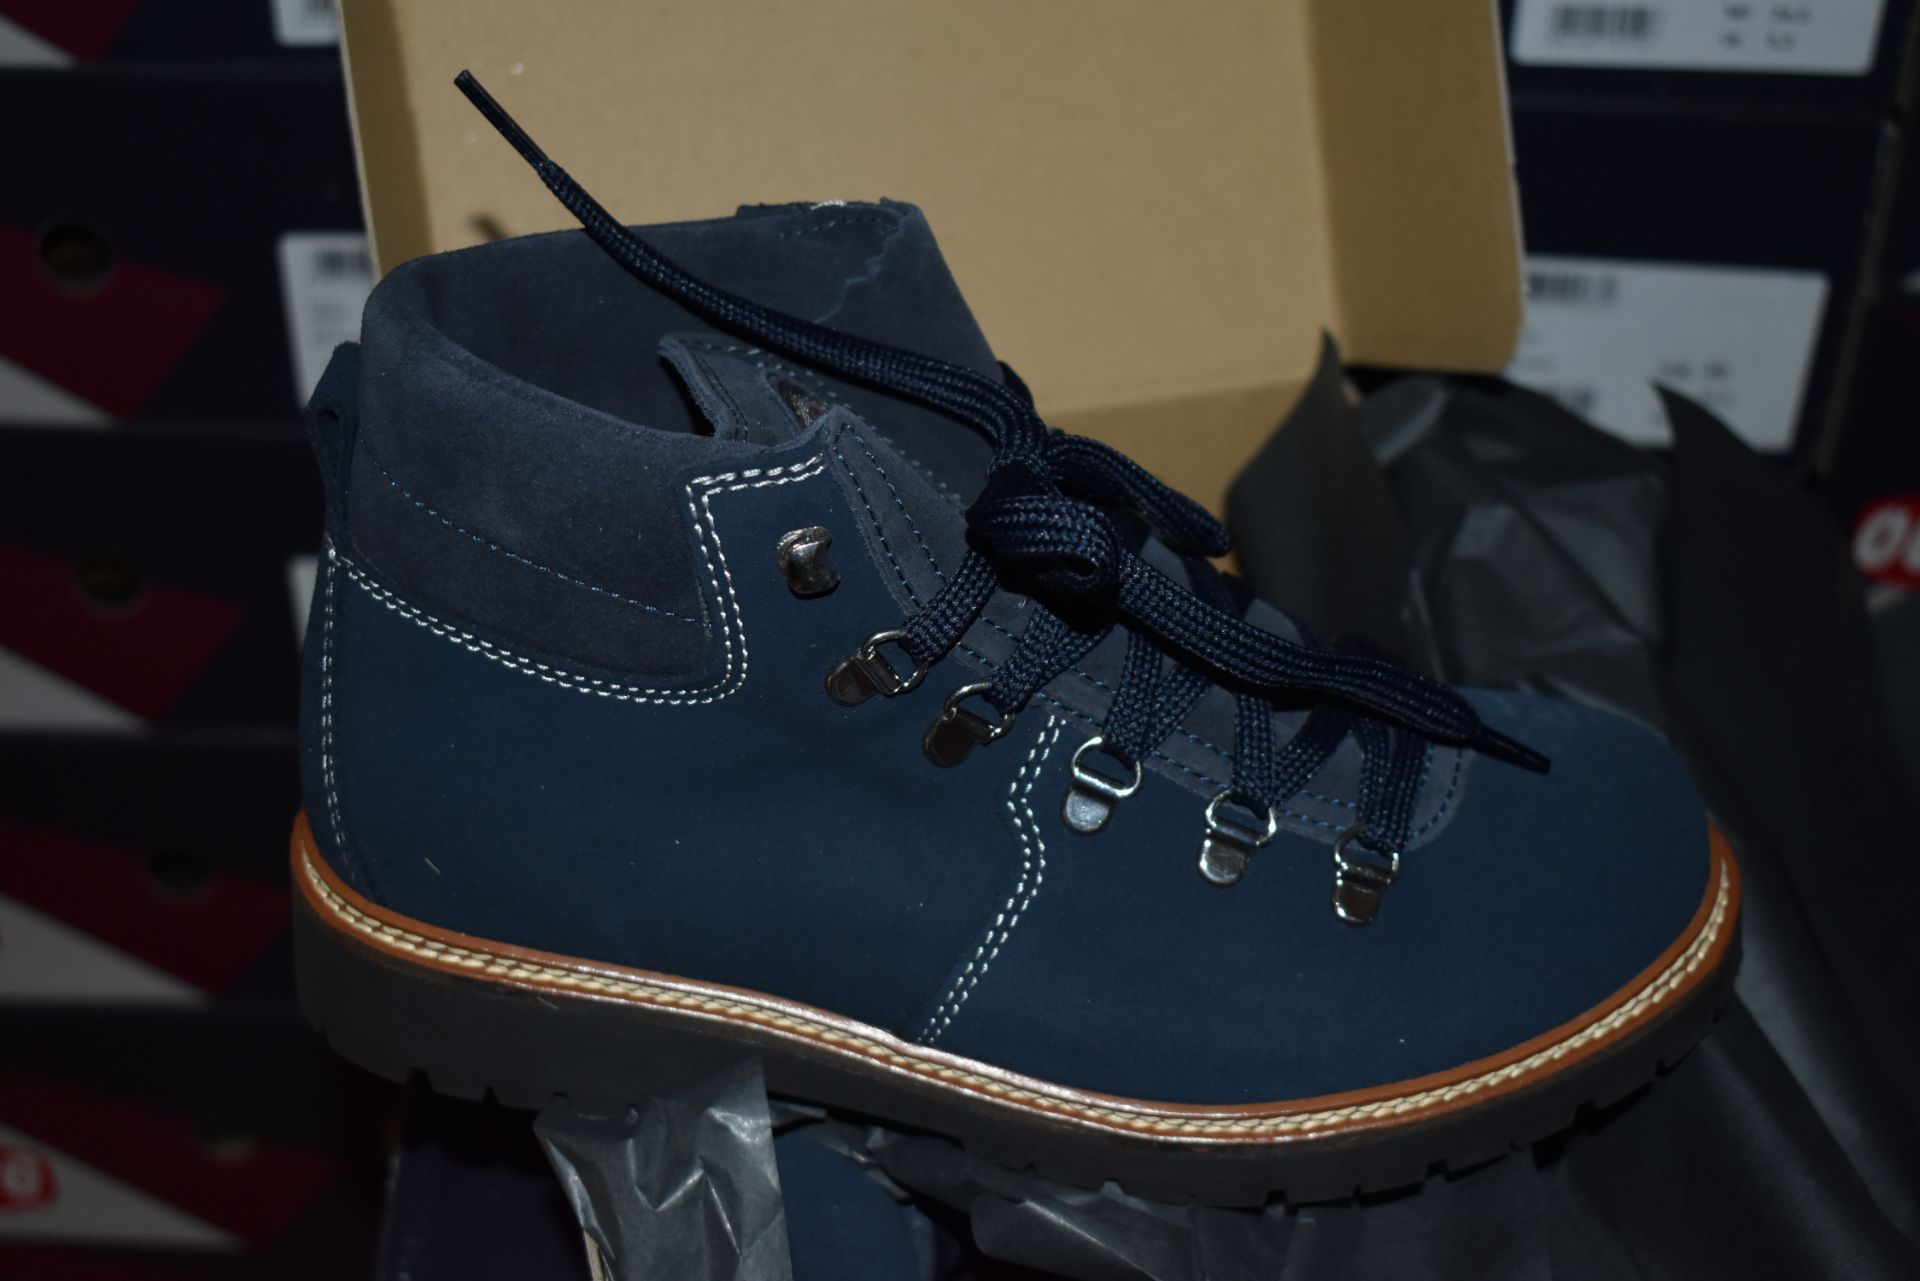 1 x Pair of Designer Olang Merano 82 Blu Women's Winter Boots - Euro Size 40 - Brand New Boxed Stock - Image 2 of 4